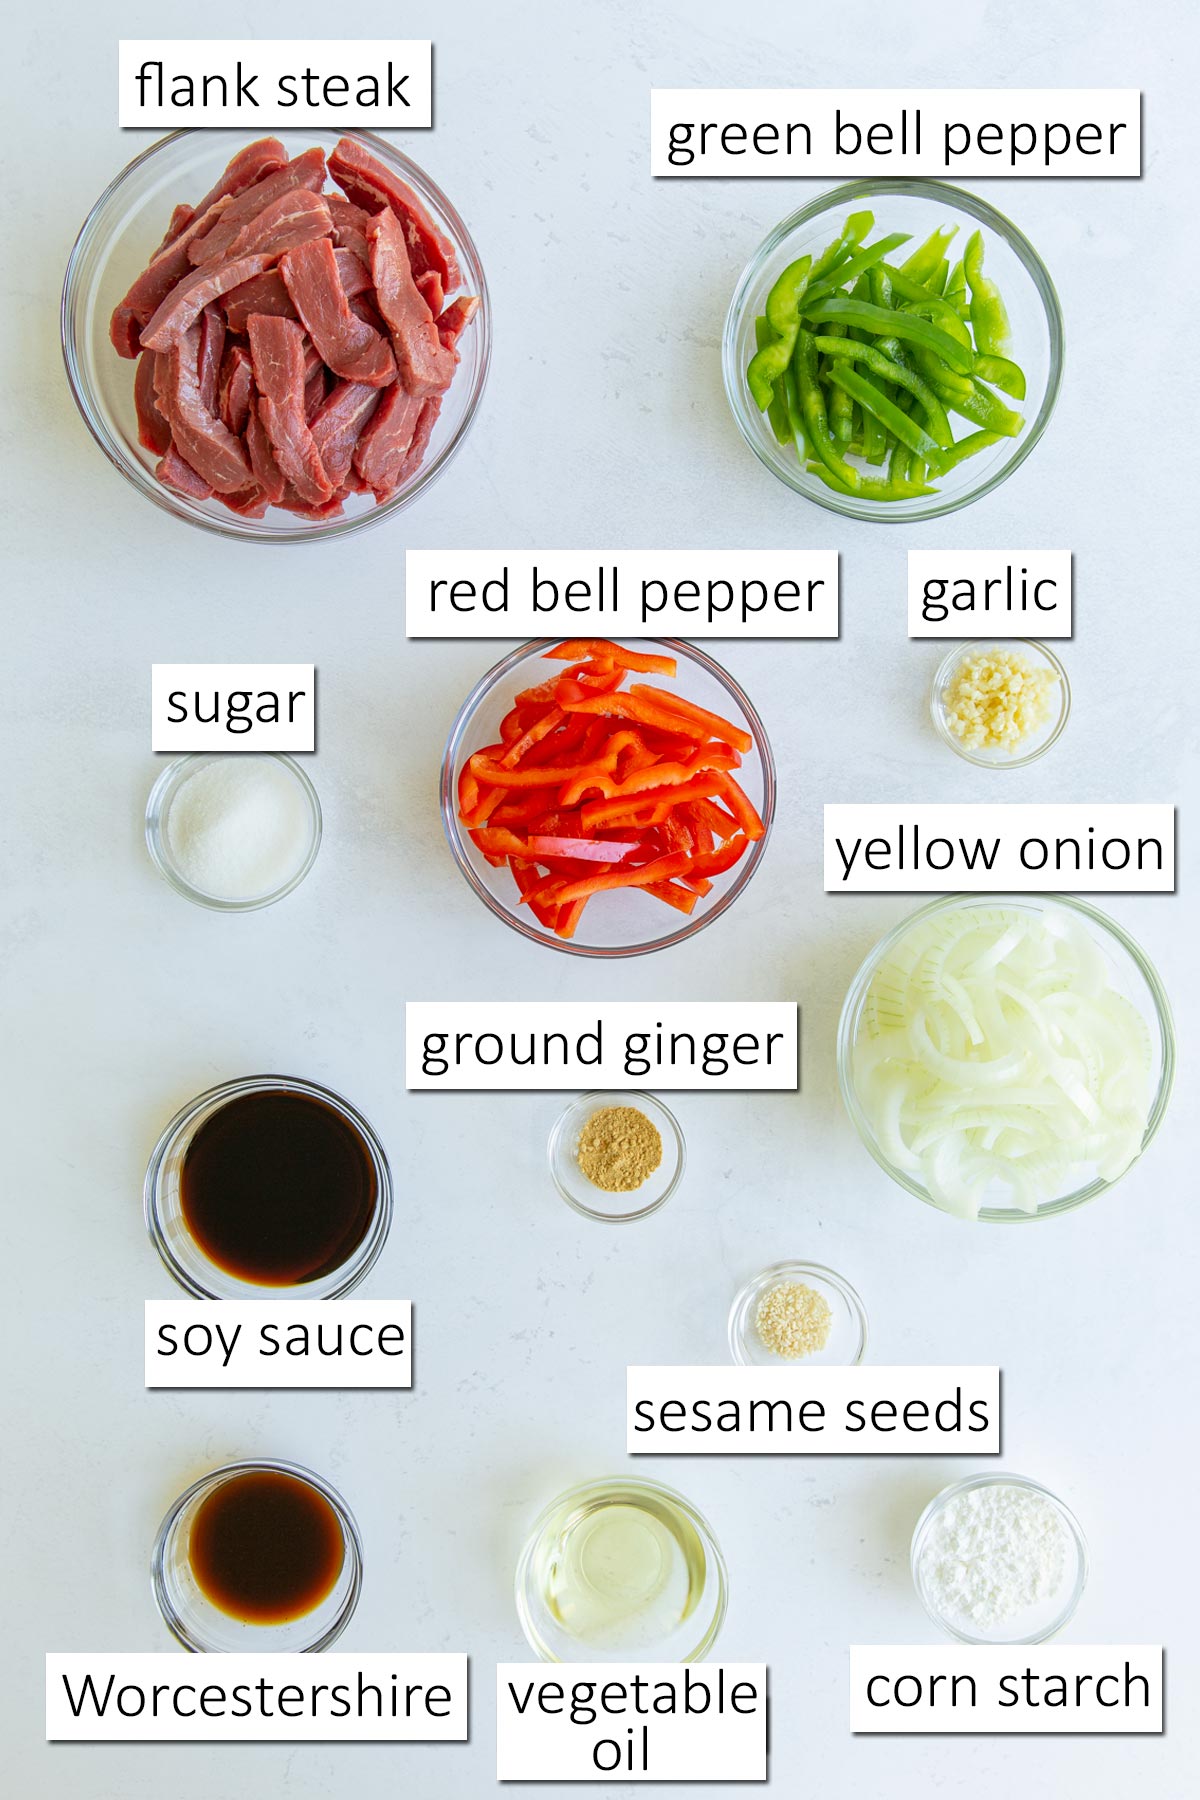 Overhead view of ingredients needed to make pepper steak and onions.